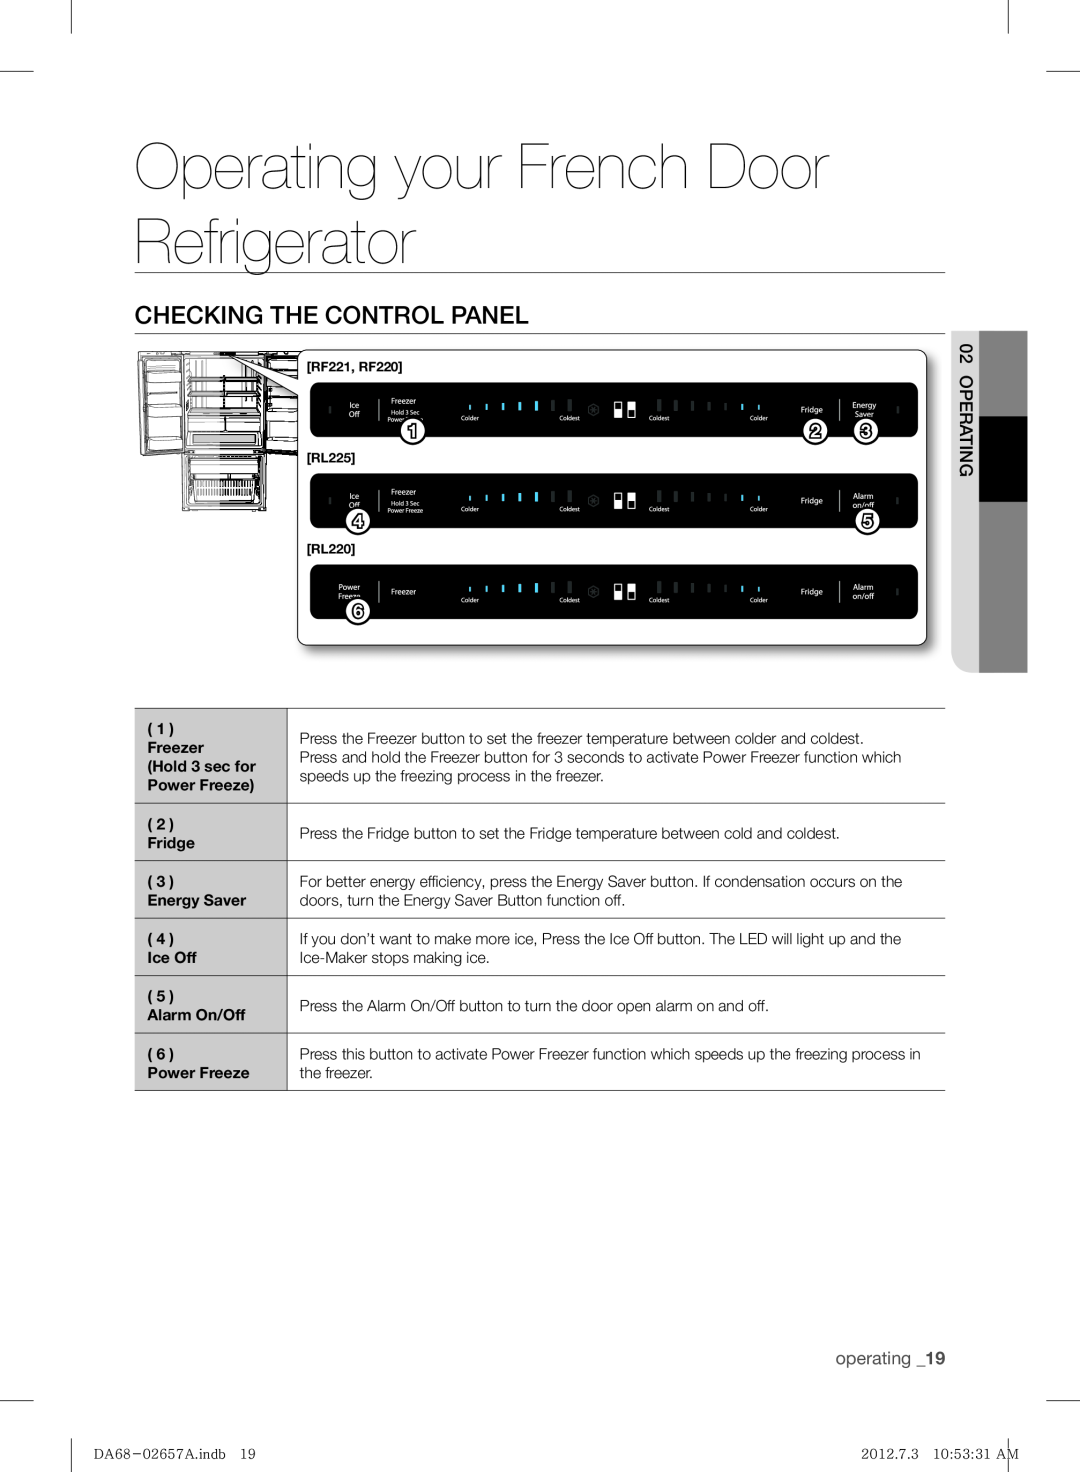 Samsung RF221NCTABC user manual Operating your French Door Refrigerator, operating, Checking The Control Panel 